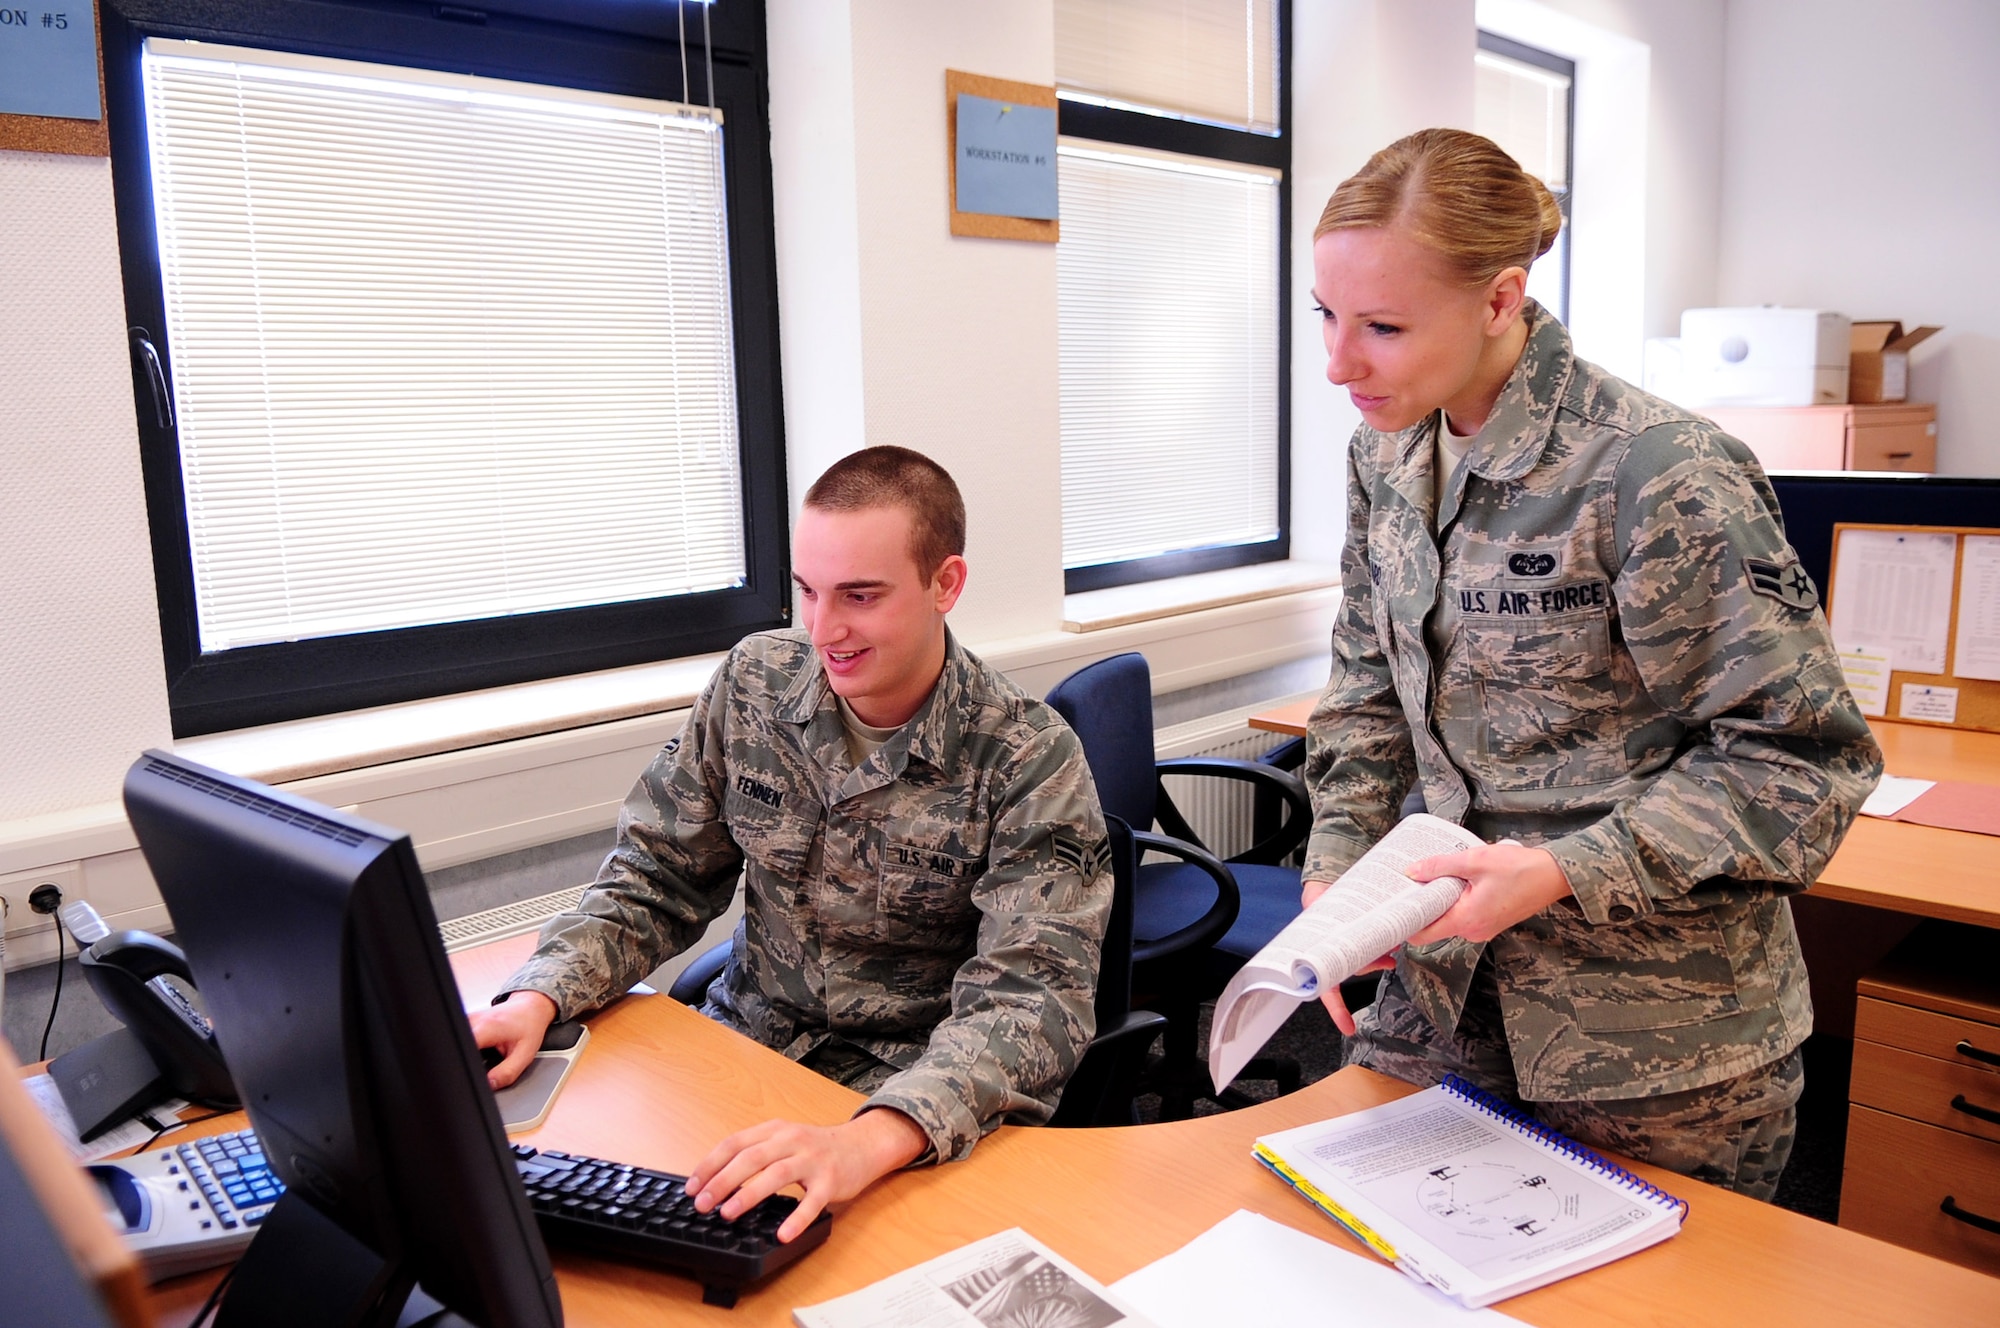 Airman 1st Class Bonnie Shepard, 86th Airlift Wing, helps A1C Nicholas Fennen, 86th AW, with his taxes at the Law Center, Ramstein Air Base, Germany, March 20, 2012. Members at the Law Center strive to provide on-time, on-target legal advice and services to the Kaiserslautern Military Community. (U.S. Air Force photo by Senior Airman Brittany Perry)